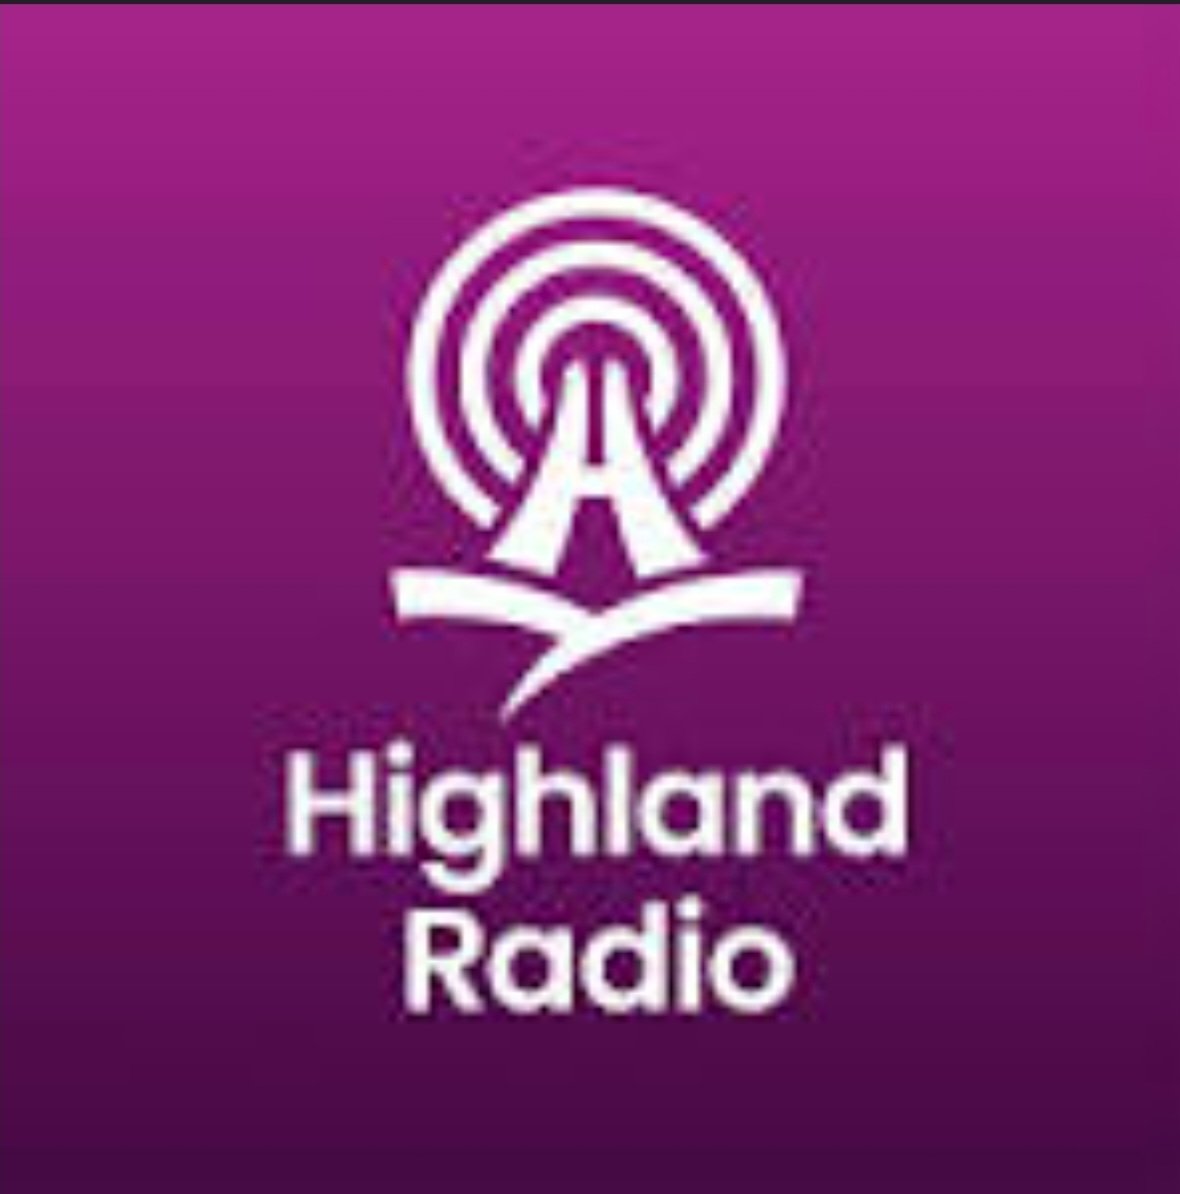 Highland Radio:

The mind boggles at d level of distortion that Gerry Rabbitte and family's Highland Radio continually & deliberately bring 2d (incorrectly named) MICA crisis. Why? @highlandradio
#Mica #DefectiveConcrete @taxpayers